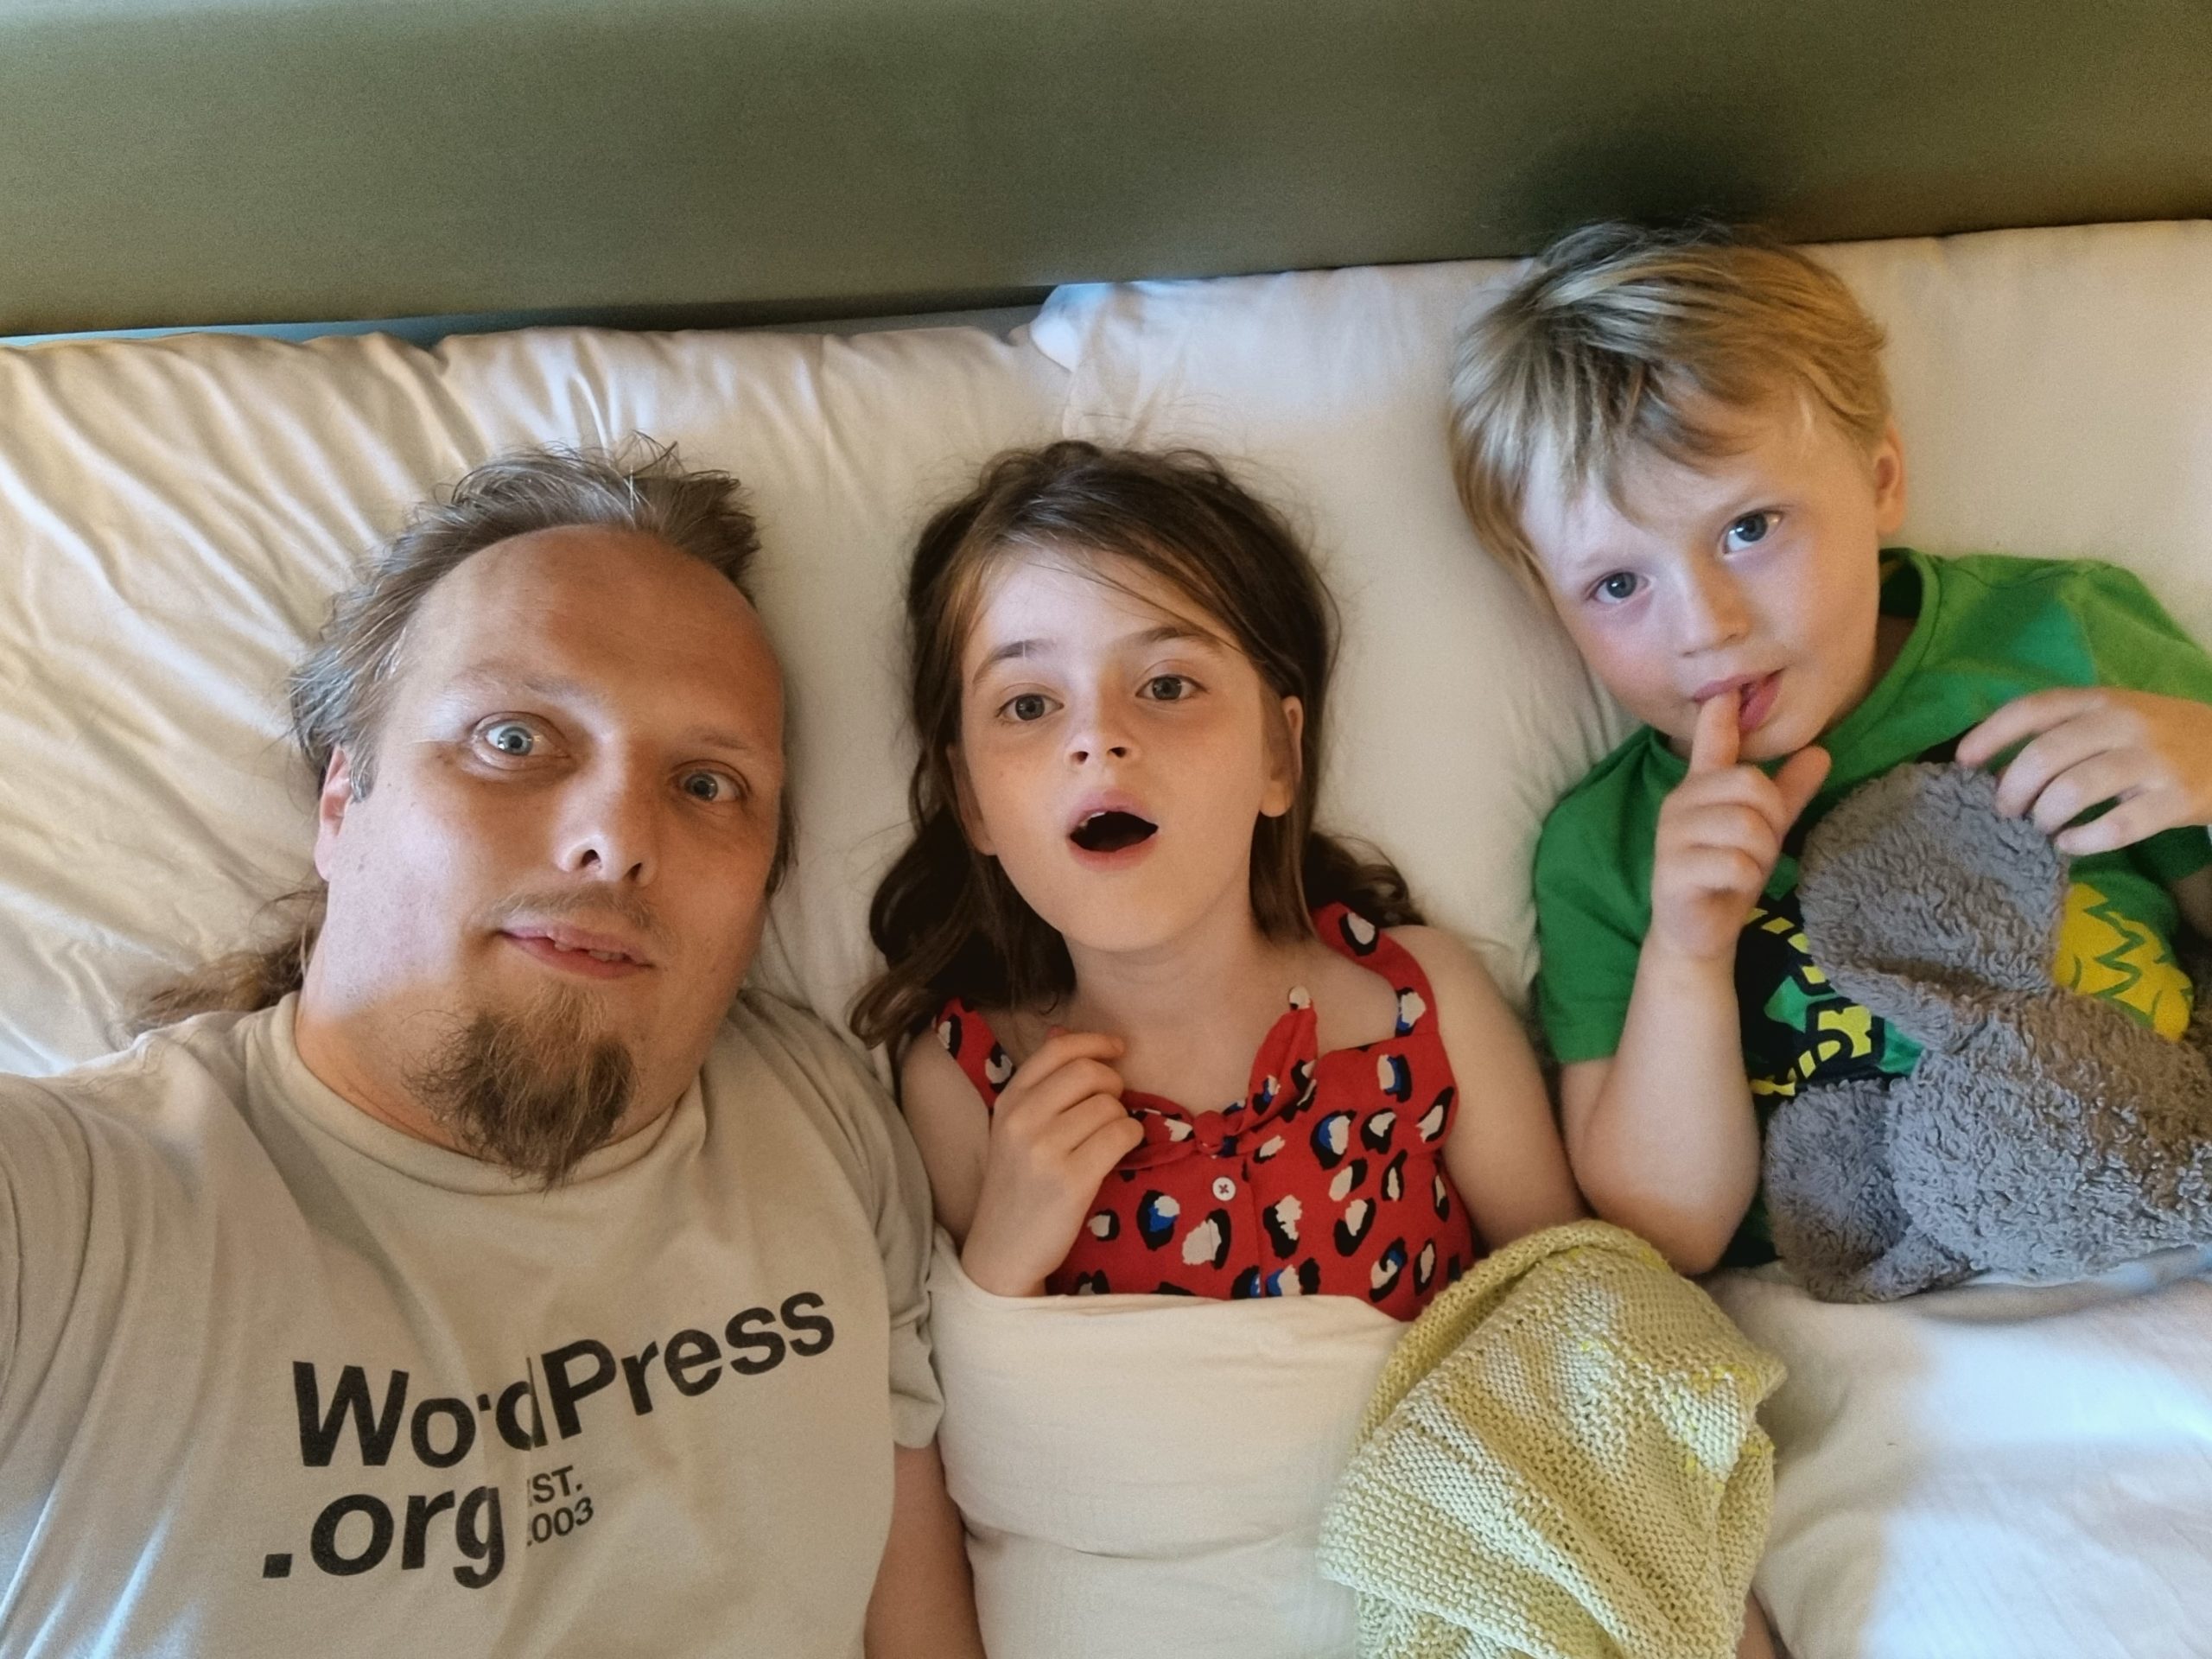 Dan and the kids in a bed at a hotel.